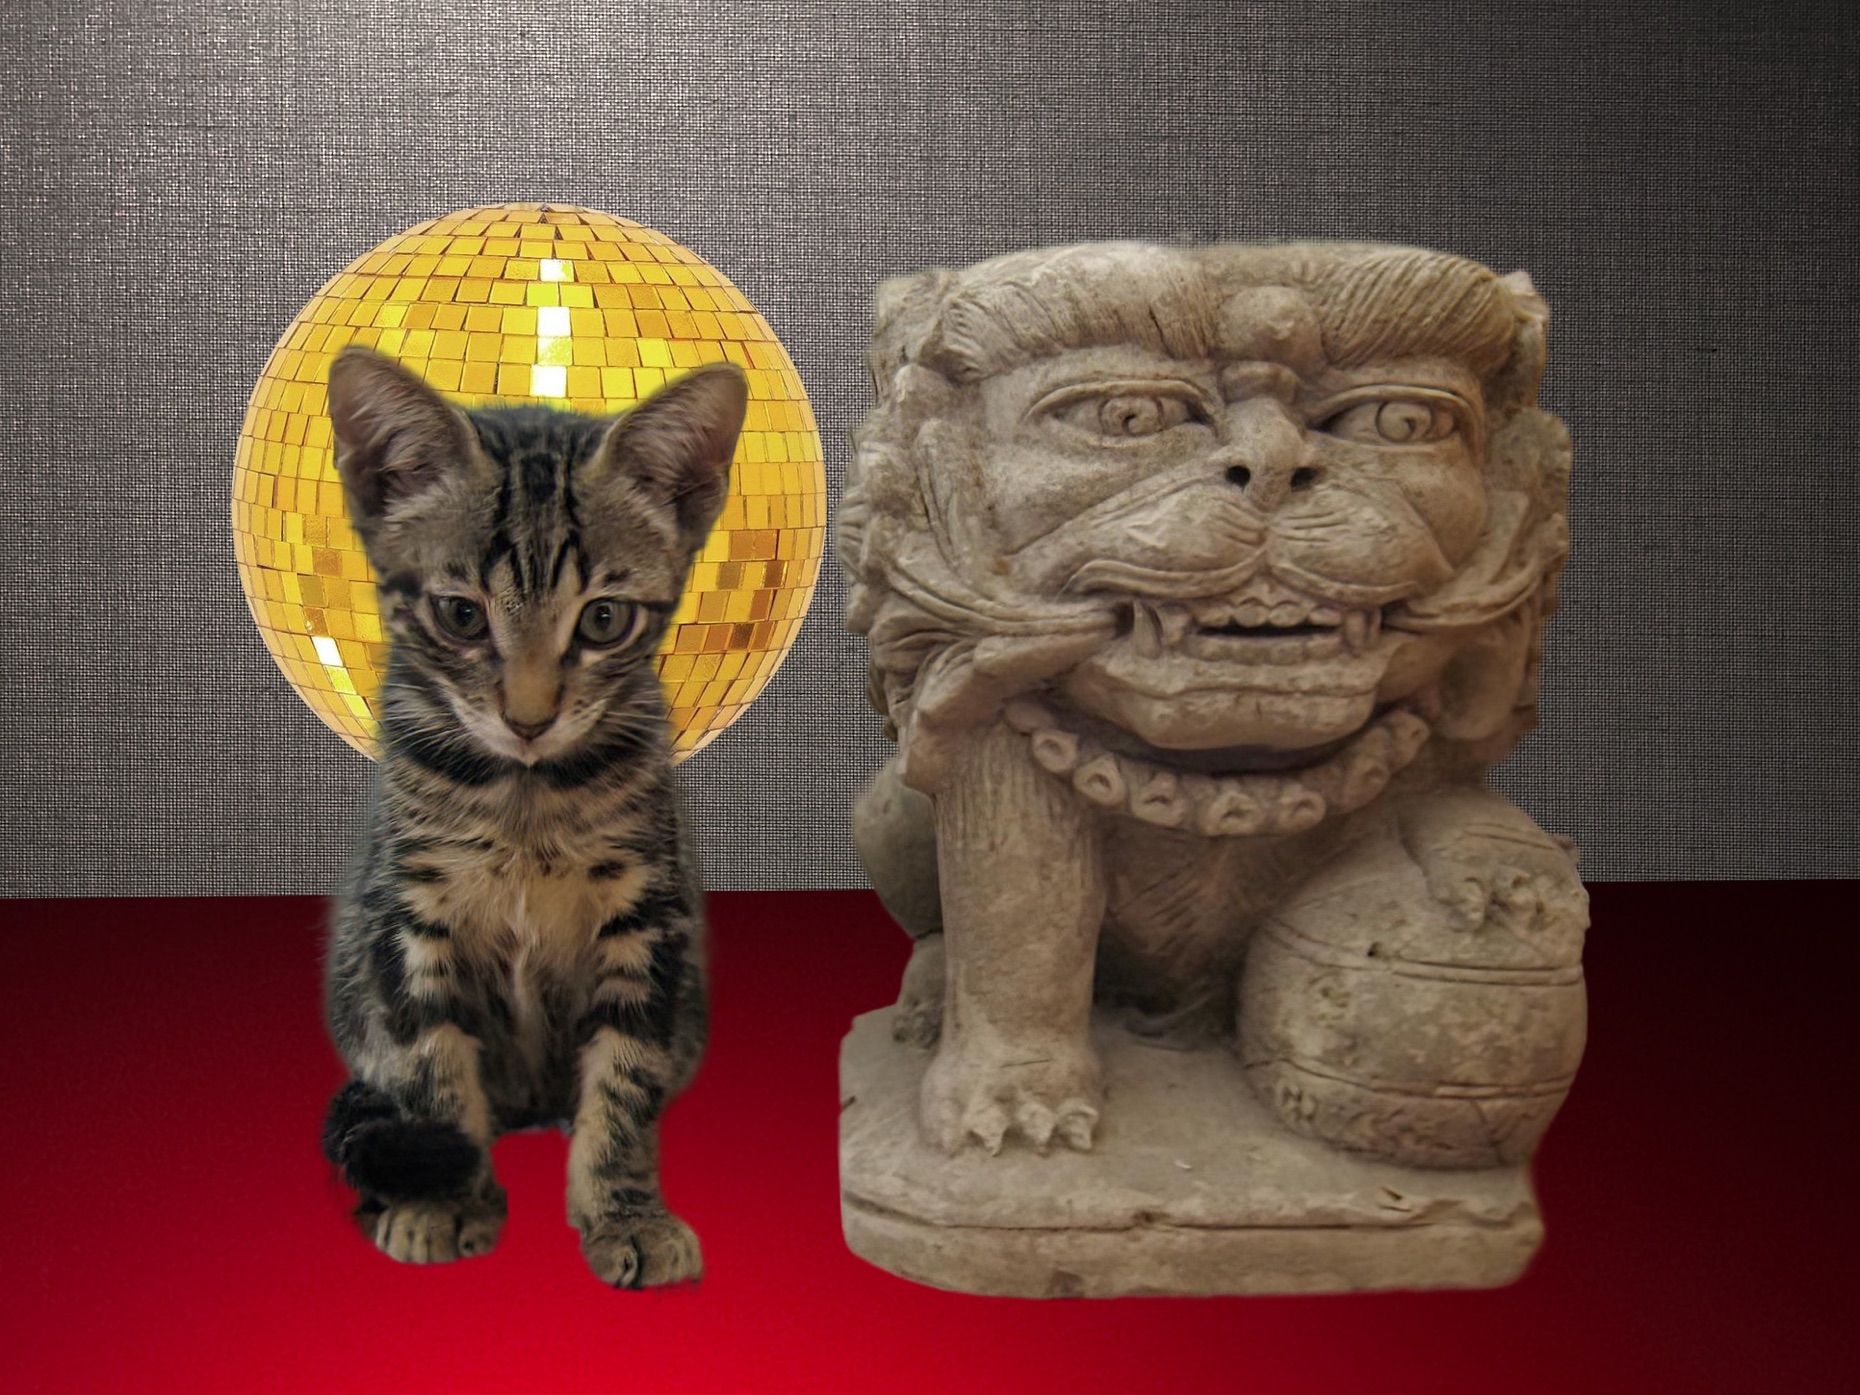 Esteban as a kitten with a gold
disco ball behind his head serving as halo sits next to the stone sculpture
of a squat, similarly sized Indonesian temple lion made from stone